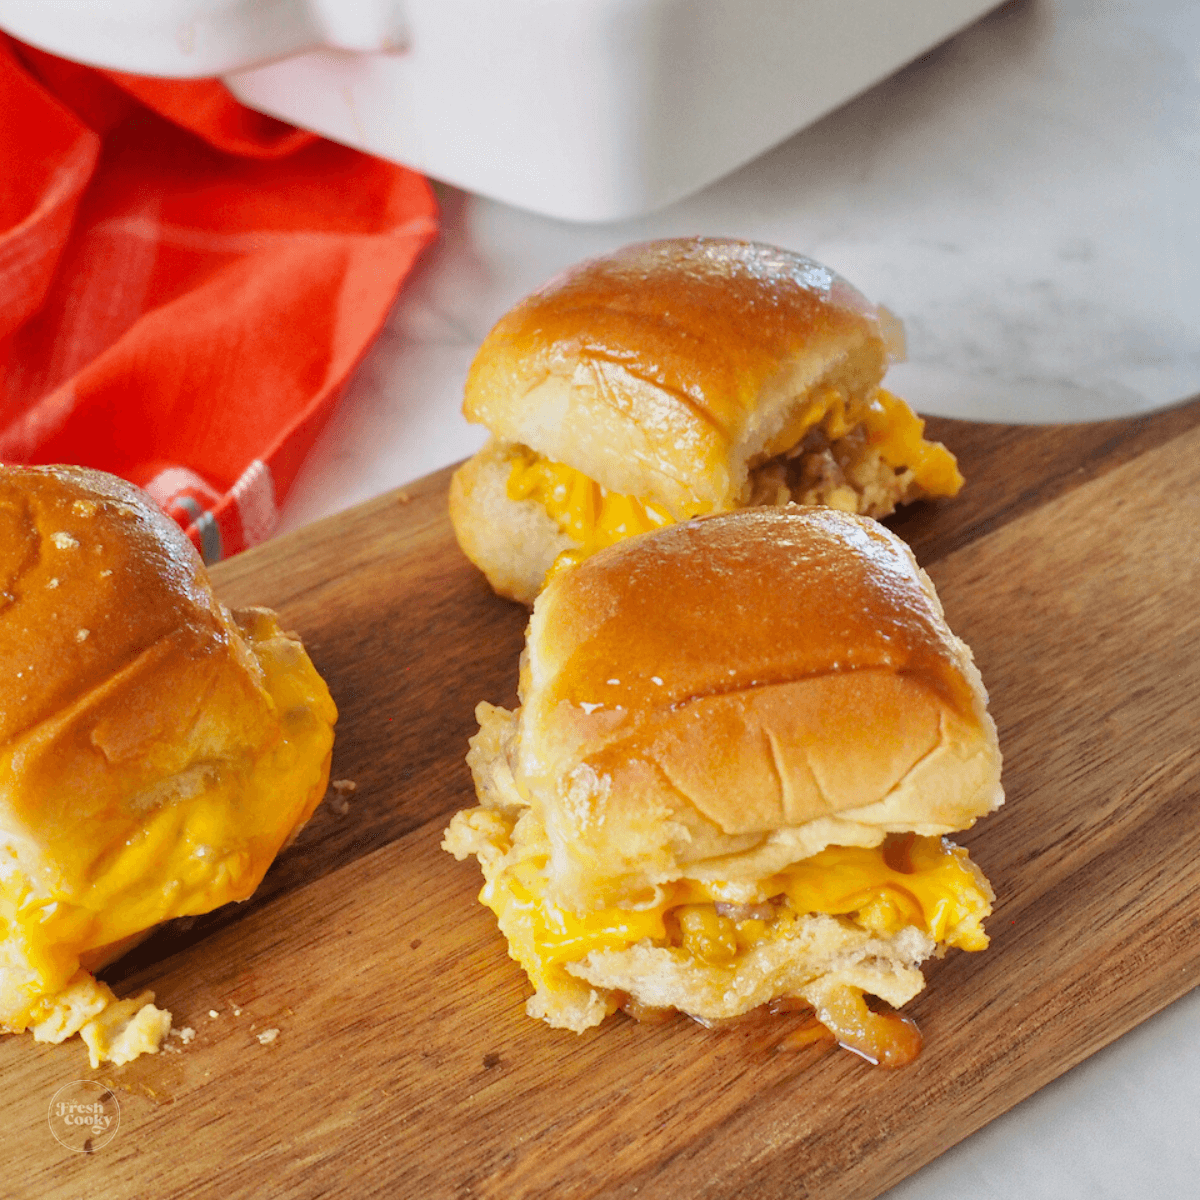 https://www.thefreshcooky.com/wp-content/uploads/2022/10/Breakfast-Sliders-square.png